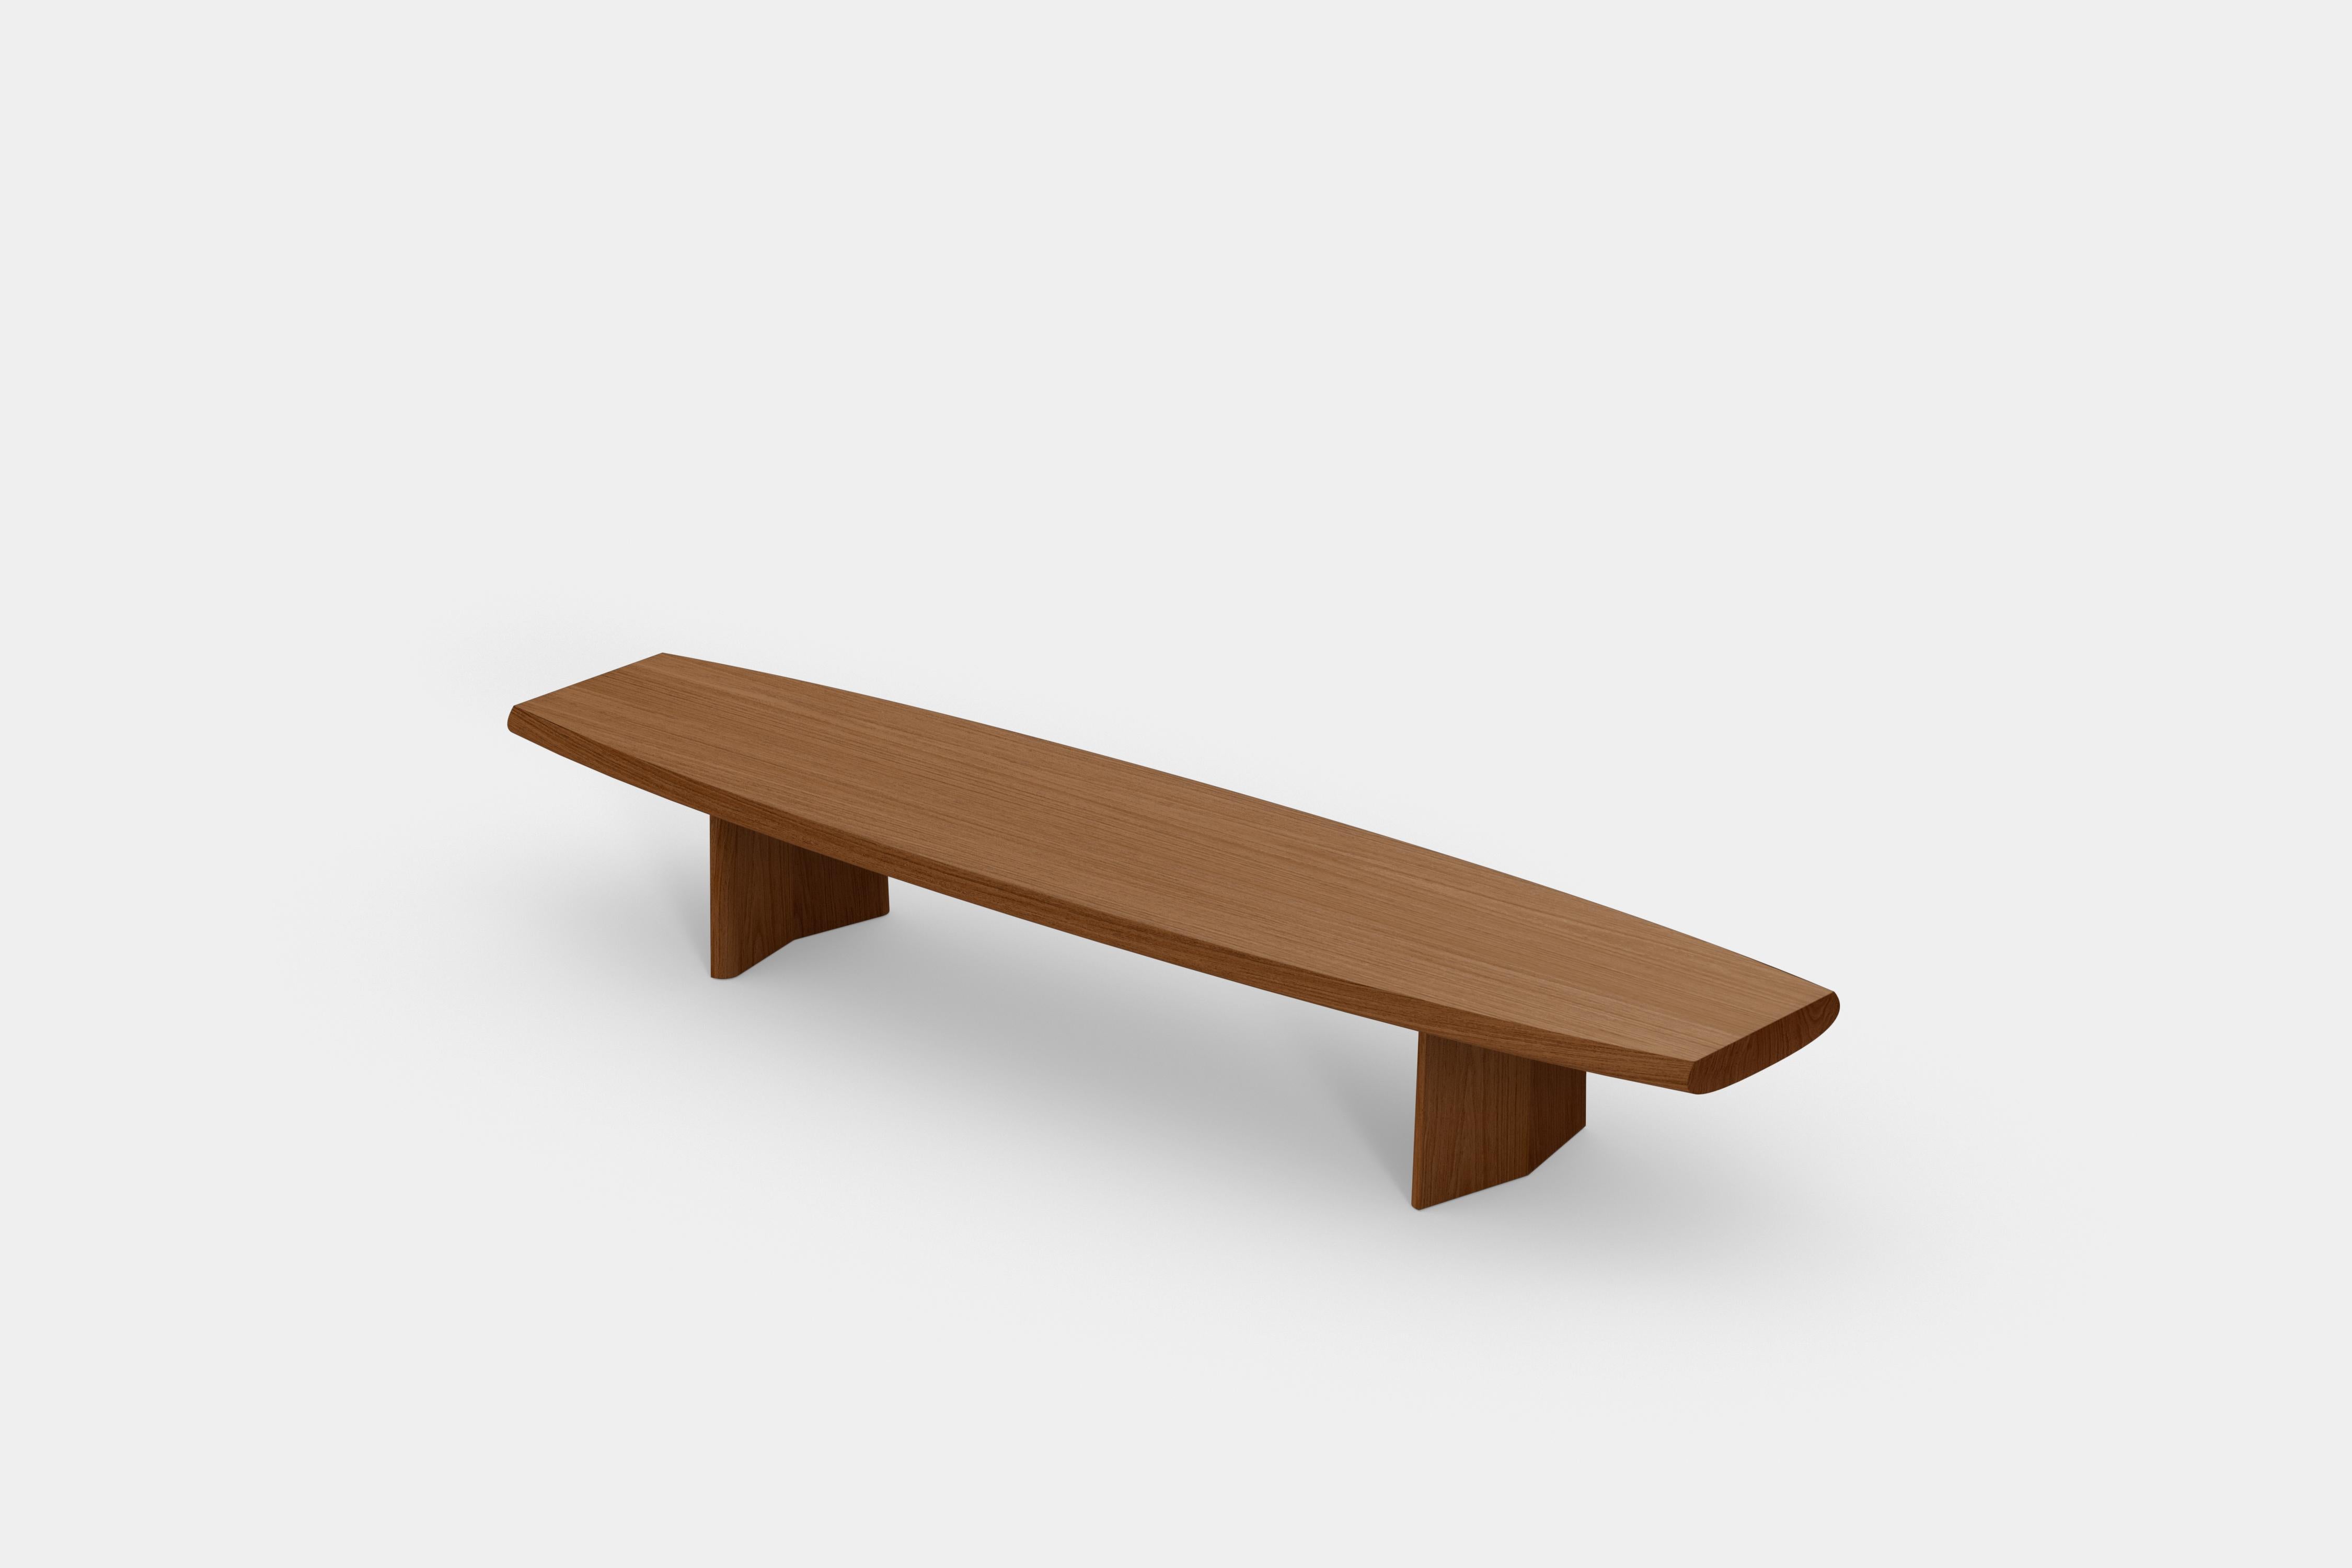 Organique Peana Low Coffee Table, Bench in Red Tinted Wood Finish by Joel Escalona en vente